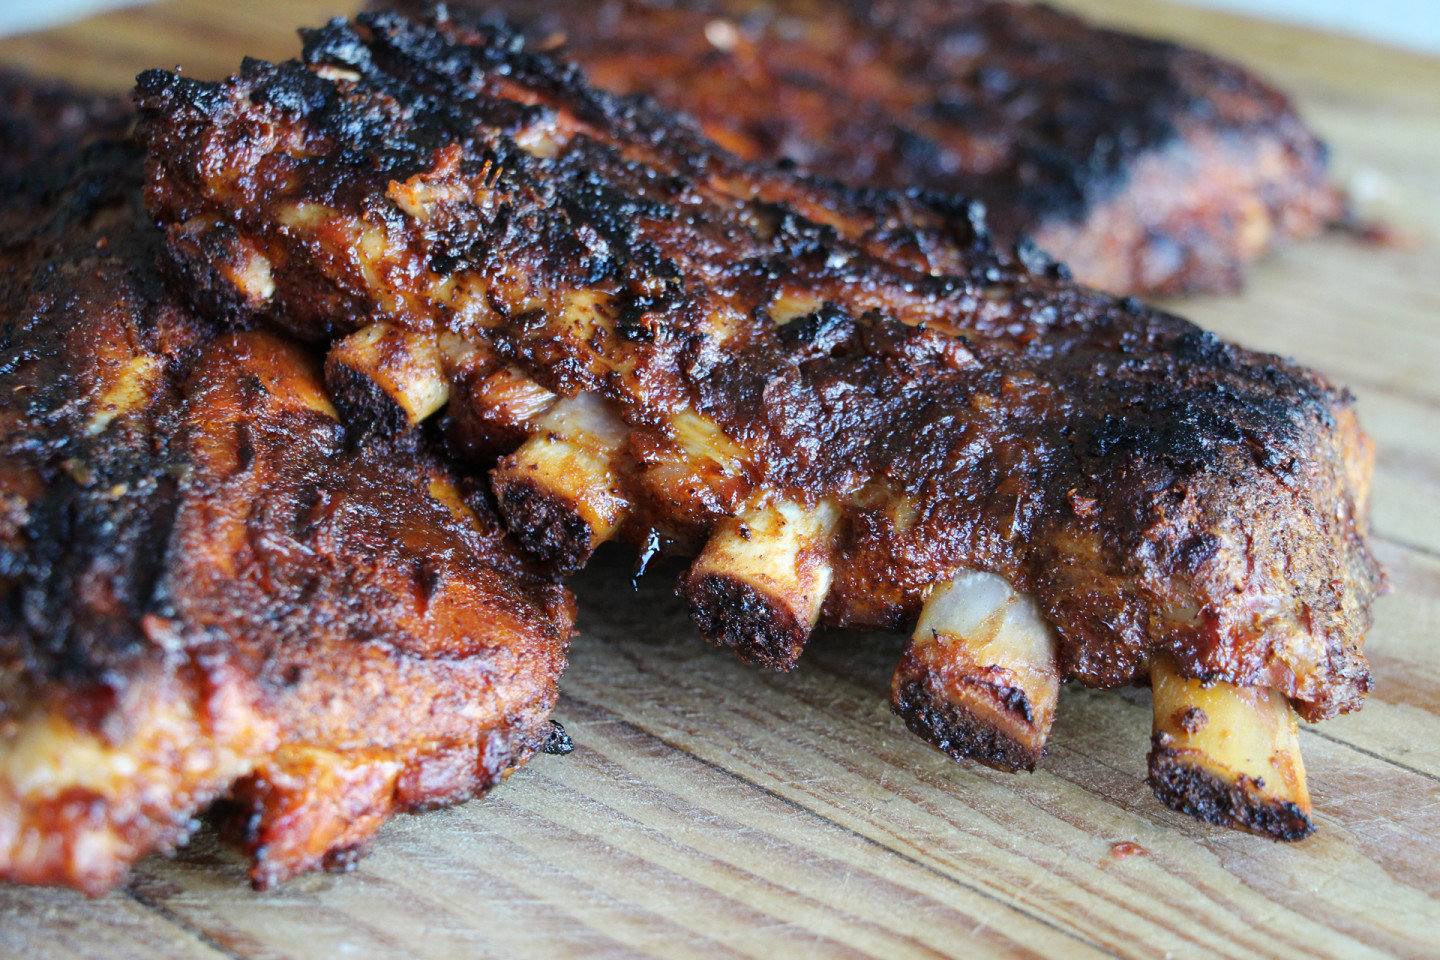 Fall-Off-The-Bone BBQ Baby Back Ribs with Homemade Barbecue Sauce | KQED